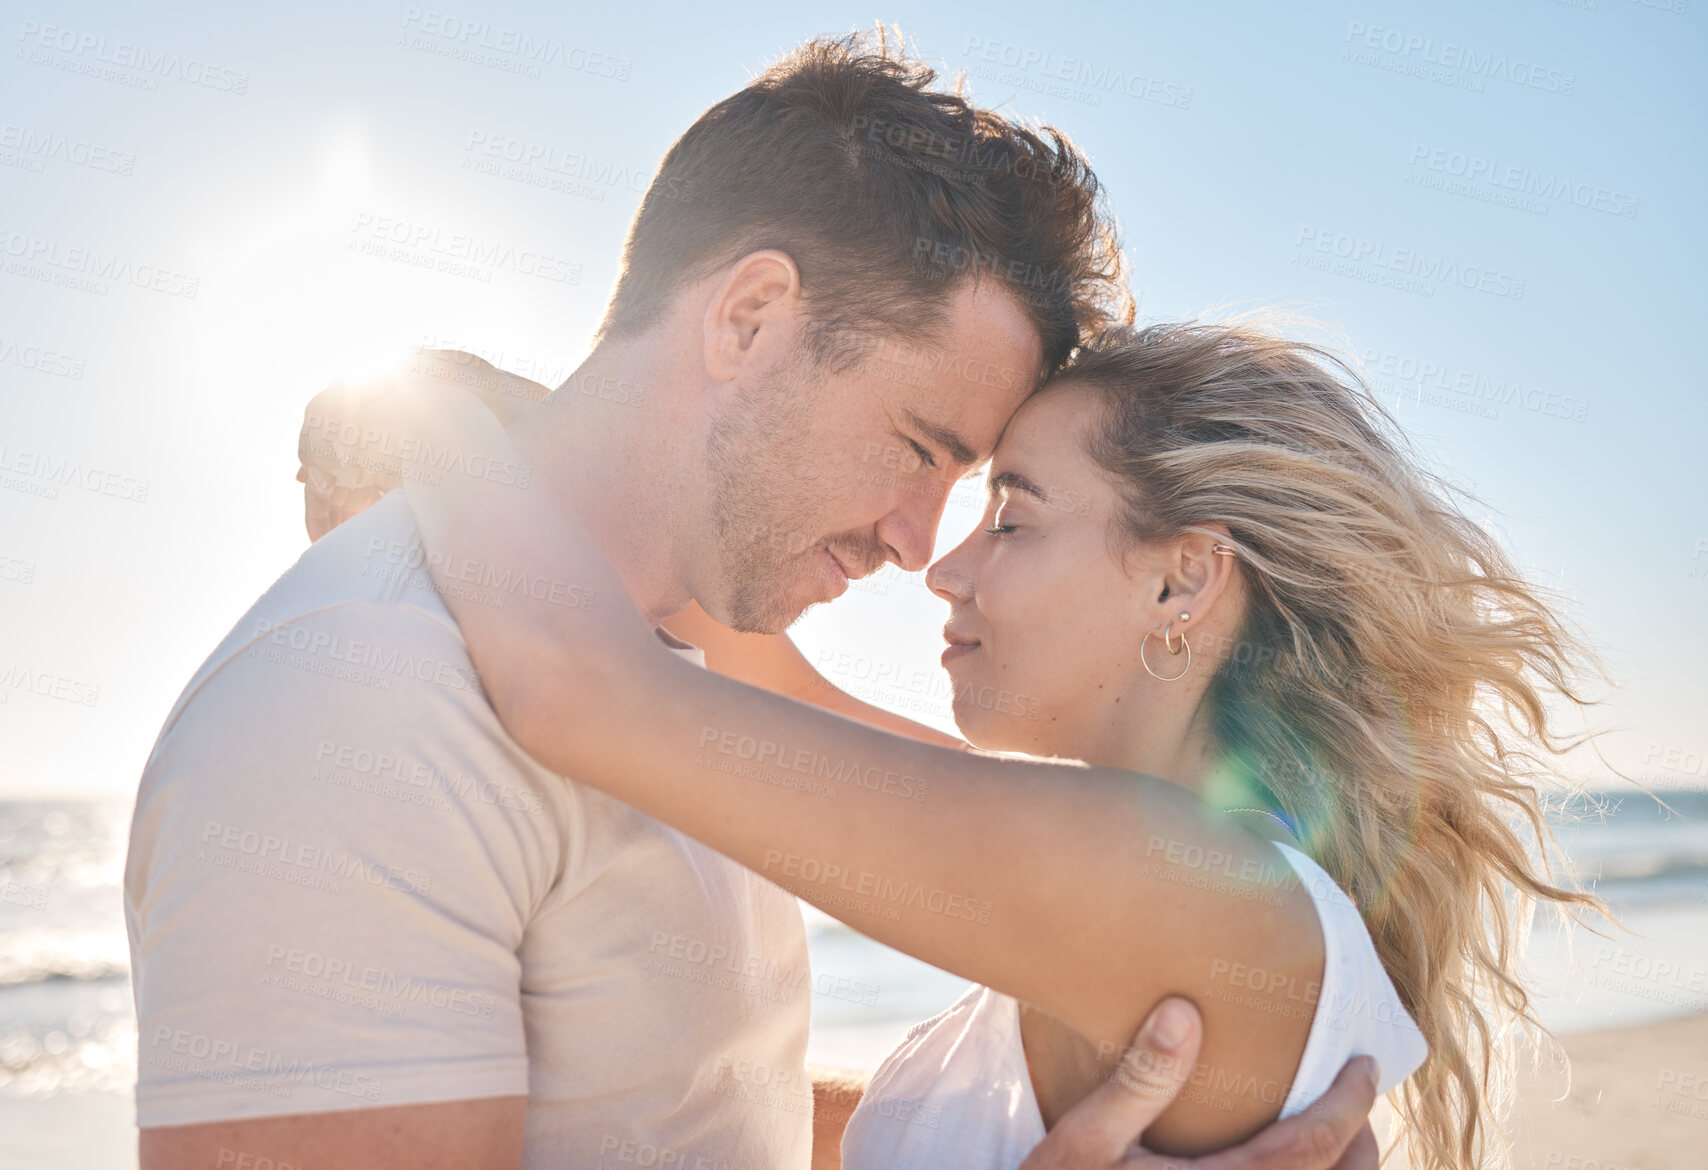 Buy stock photo Love, travel and couple hugging at the beach while on a seaside date or honeymoon vacation. Affection, romance and young man and woman embracing while on a romantic holiday adventure by the ocean.